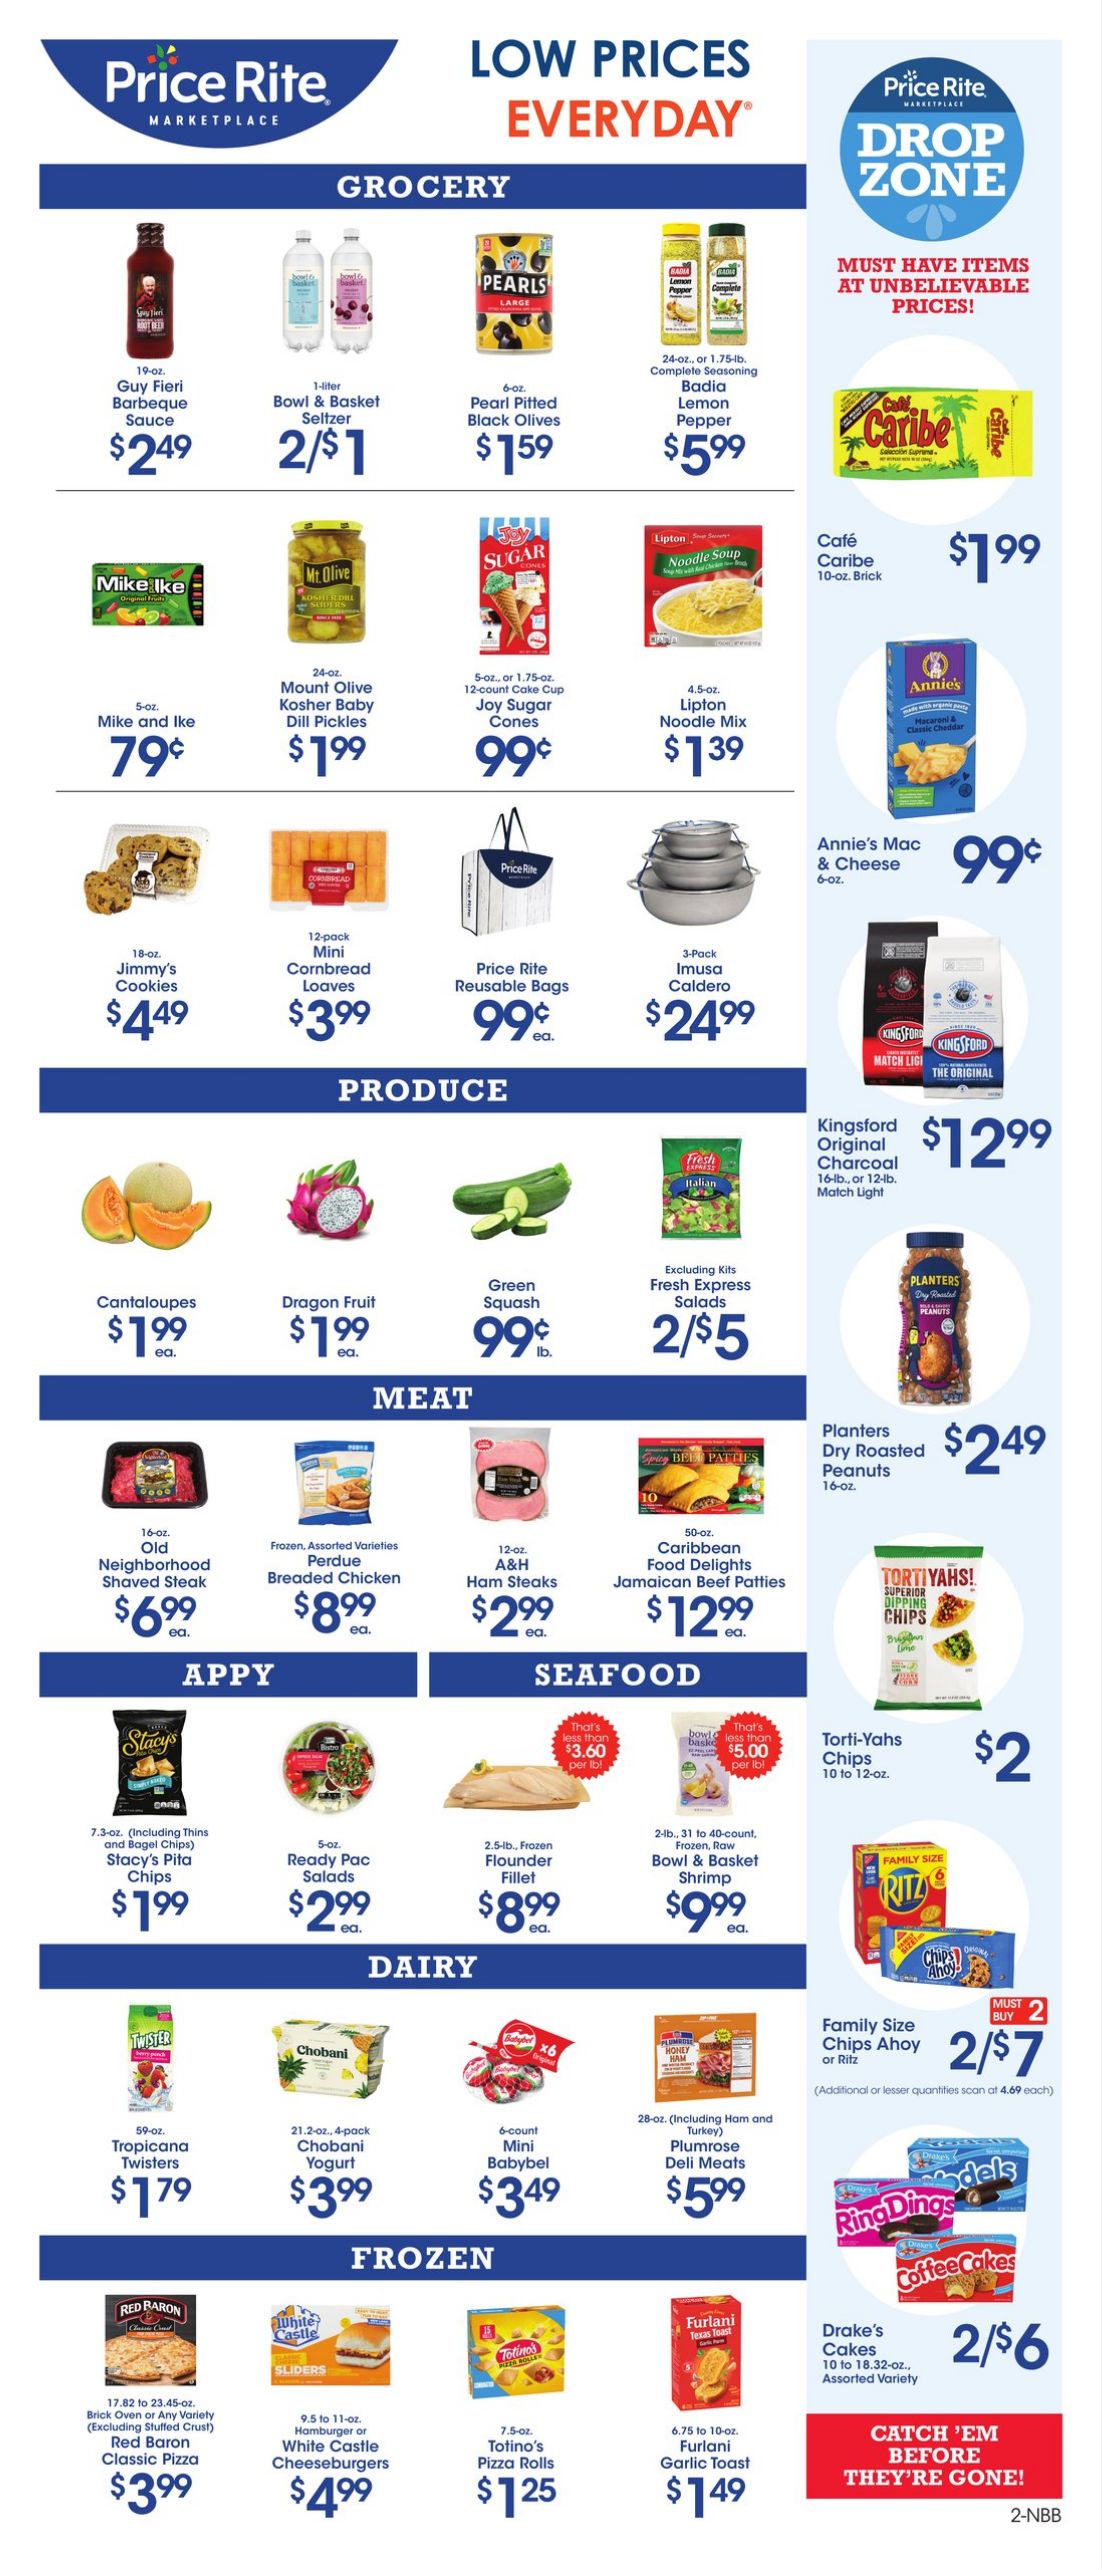 Weekly ad Price Rite 03/17/2023 - 03/30/2023